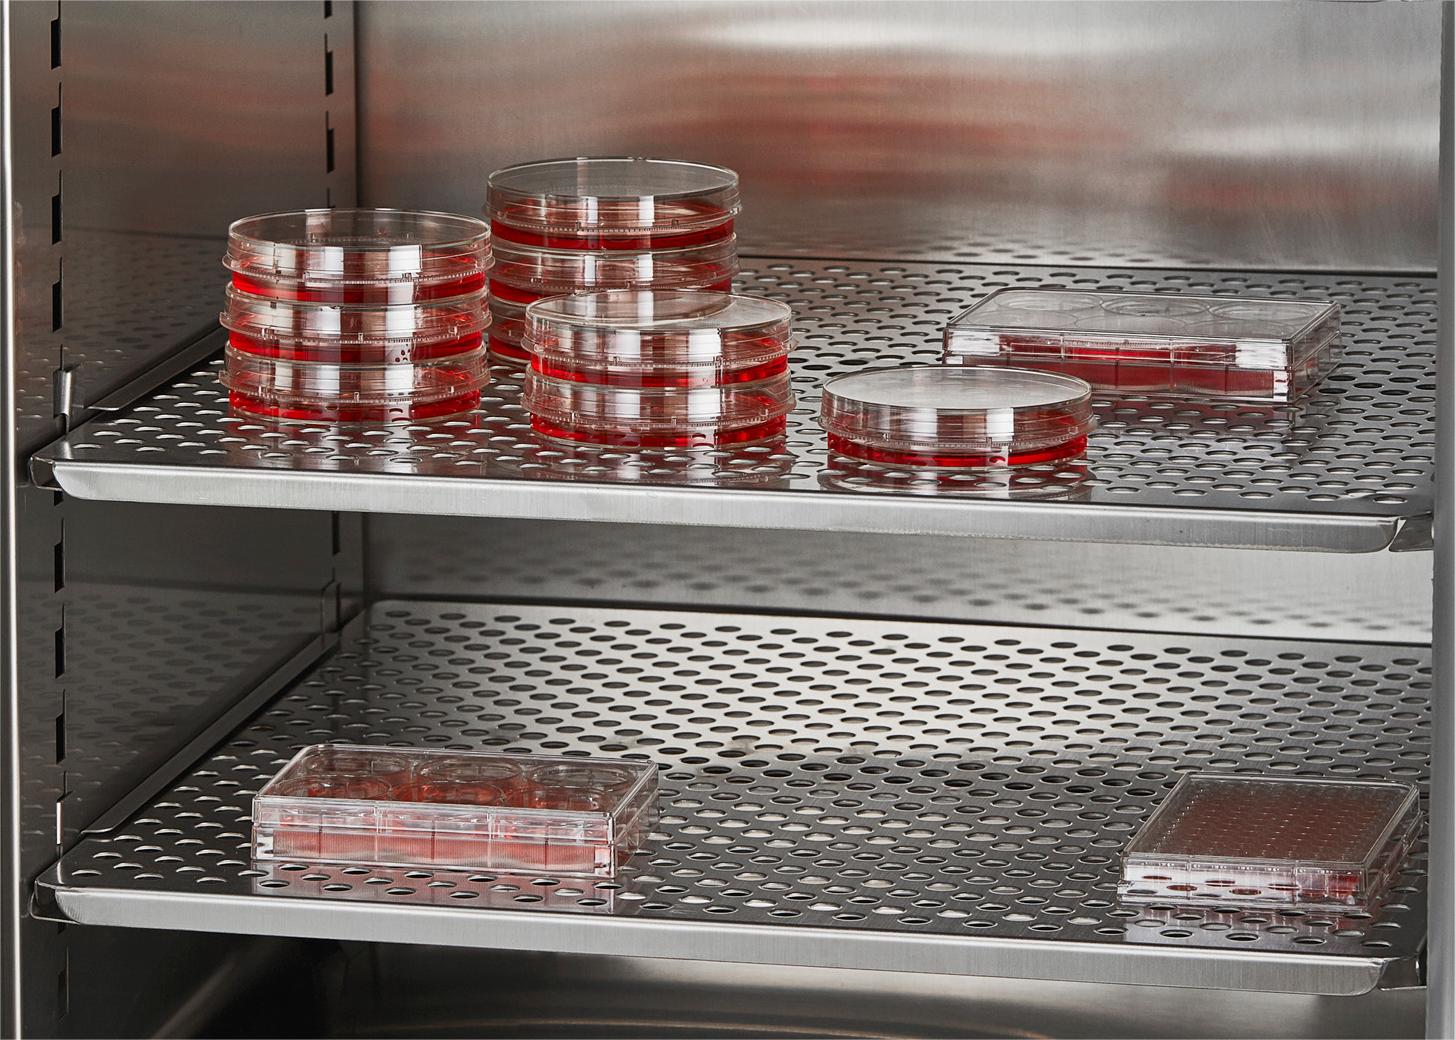 Why CO2 is needed in cell culture?